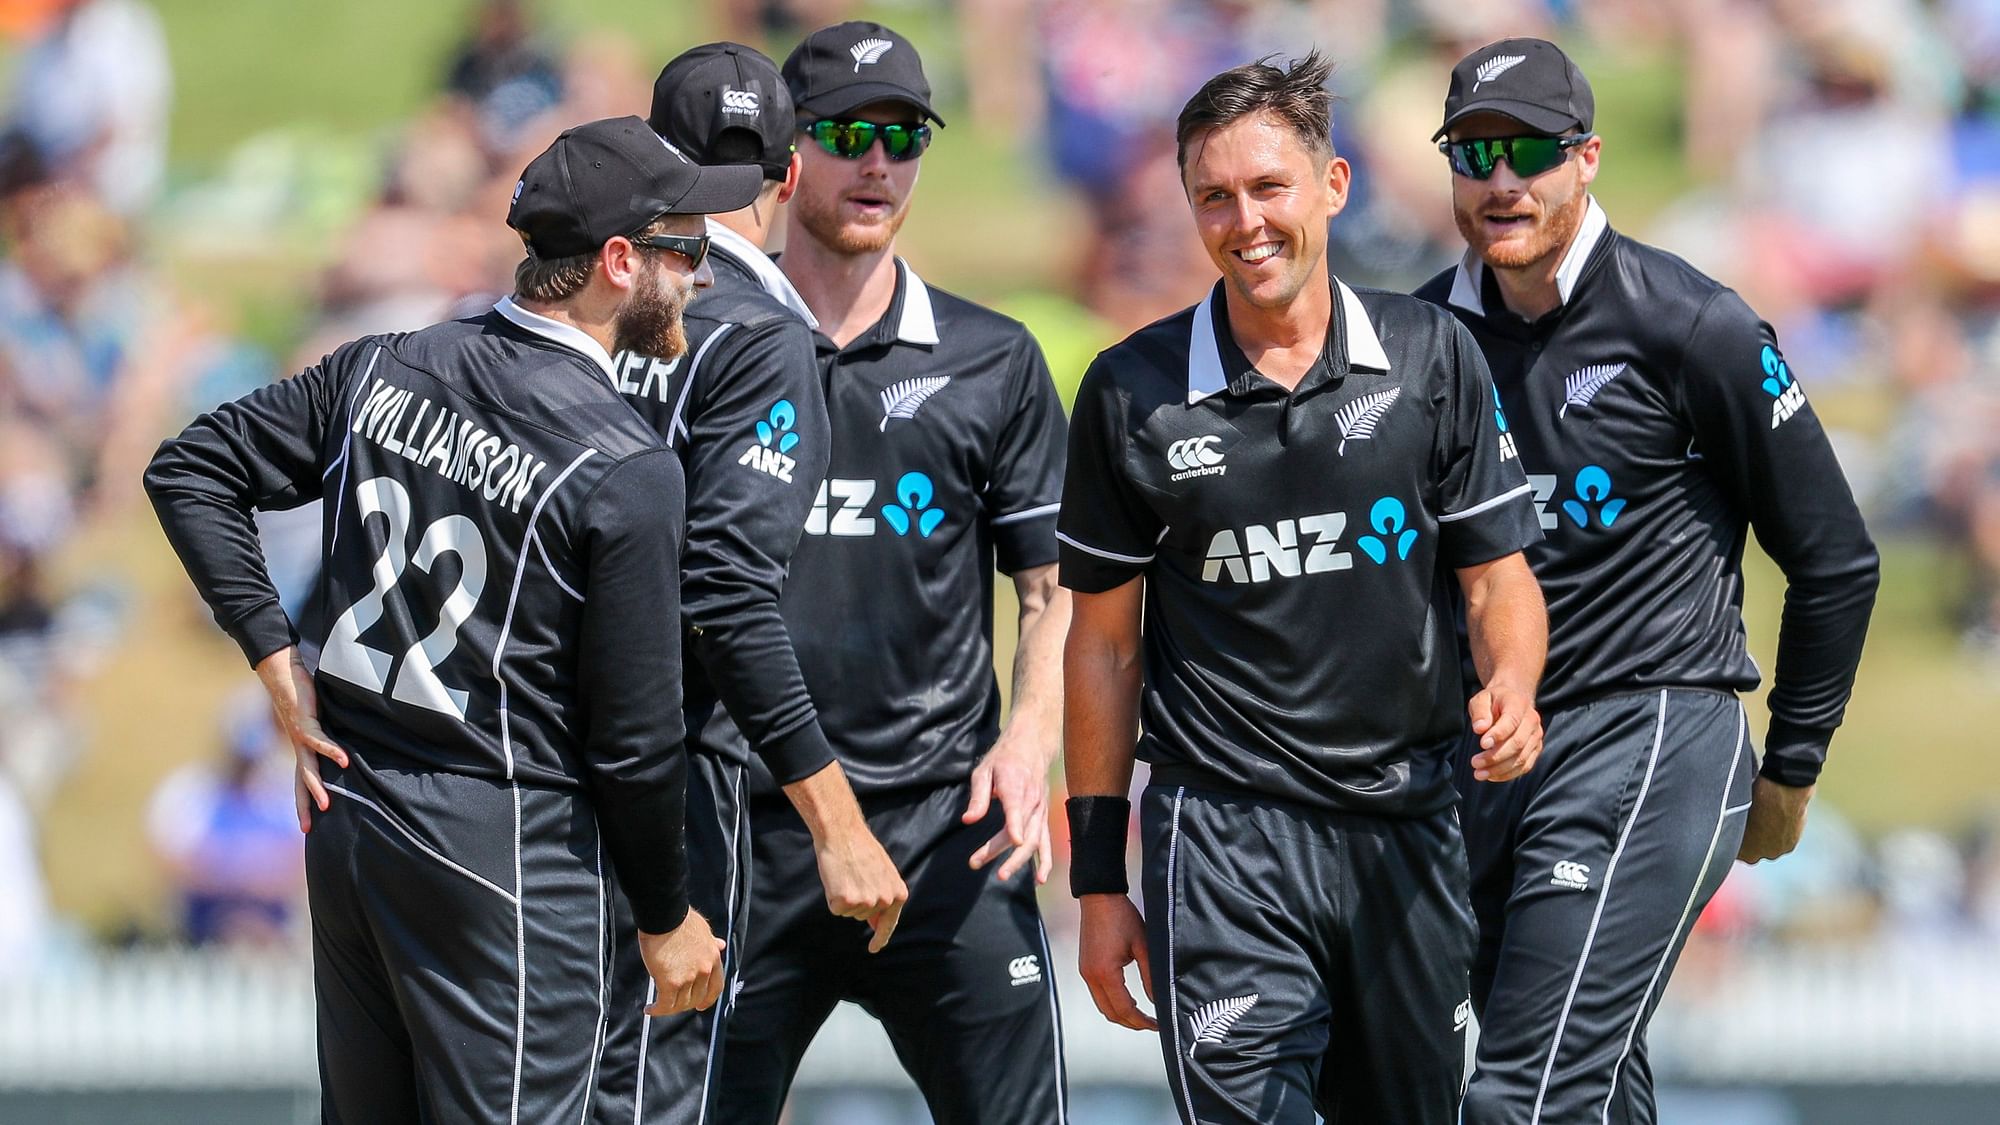 Boult’s 5/21, his fifth-five wicket haul, are the second best figures for New Zealand against India in the limited overs format.